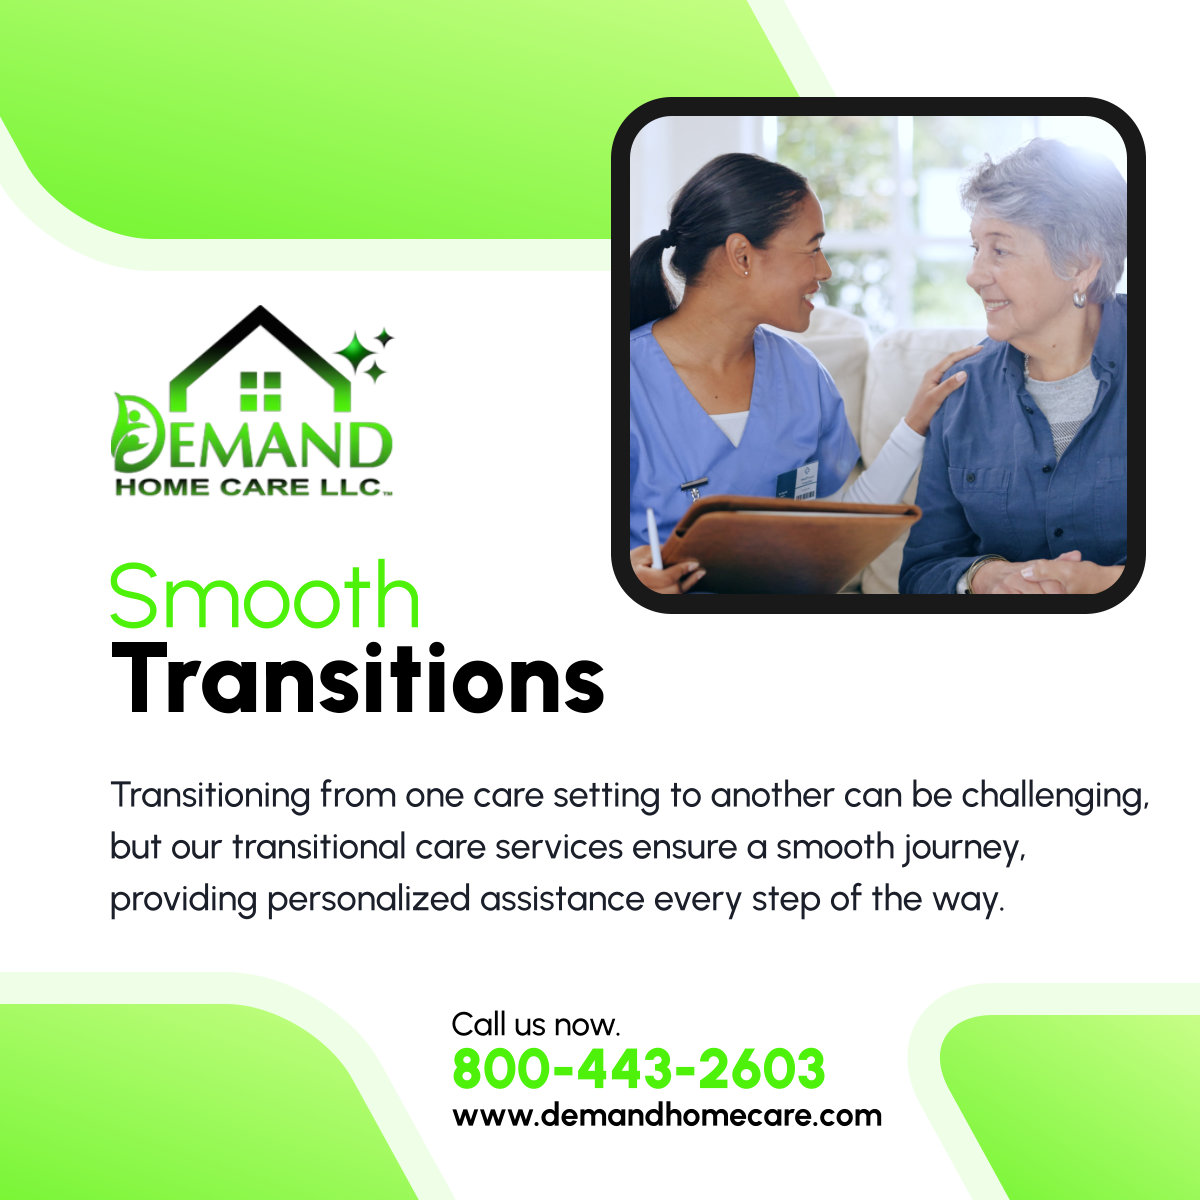 Navigate life's transitions smoothly with our personalized transitional care services. Call us at (800)443-2603 to learn more about how we can assist you. 

#TransitionalCare #HomeCare #SmoothTransitions #HealthcareSupport #TaylorMI